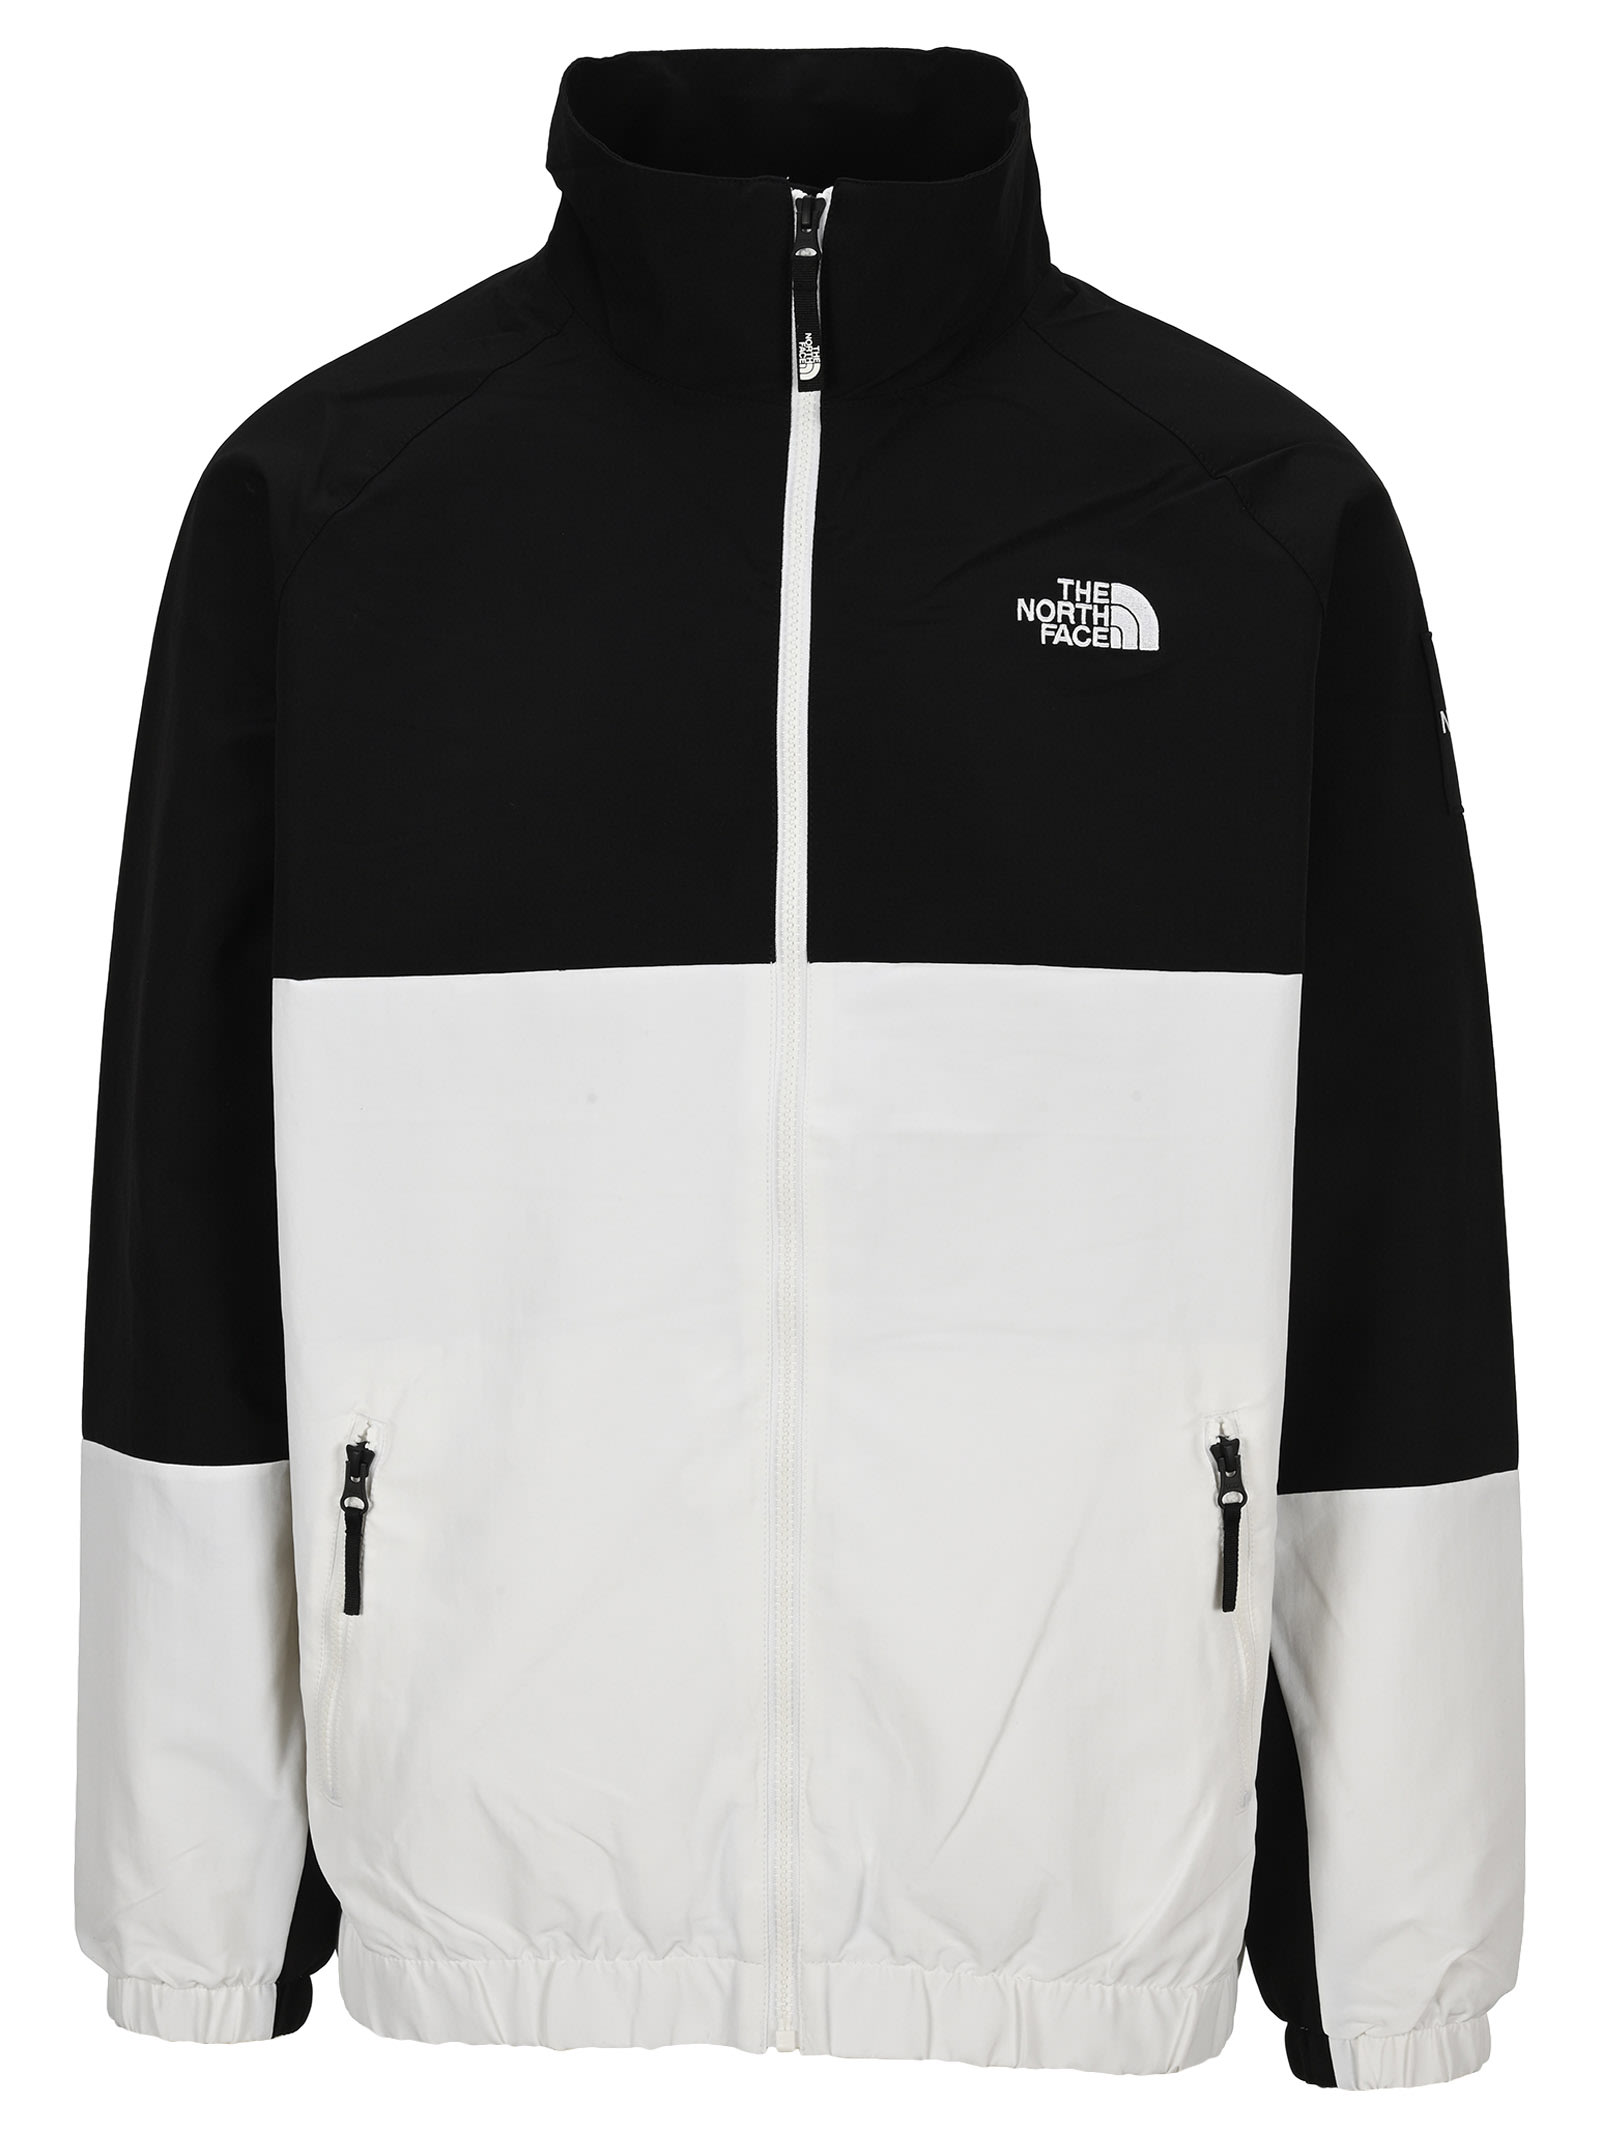 THE NORTH FACE NORTH FACE WINDWALL JACKET,11848107